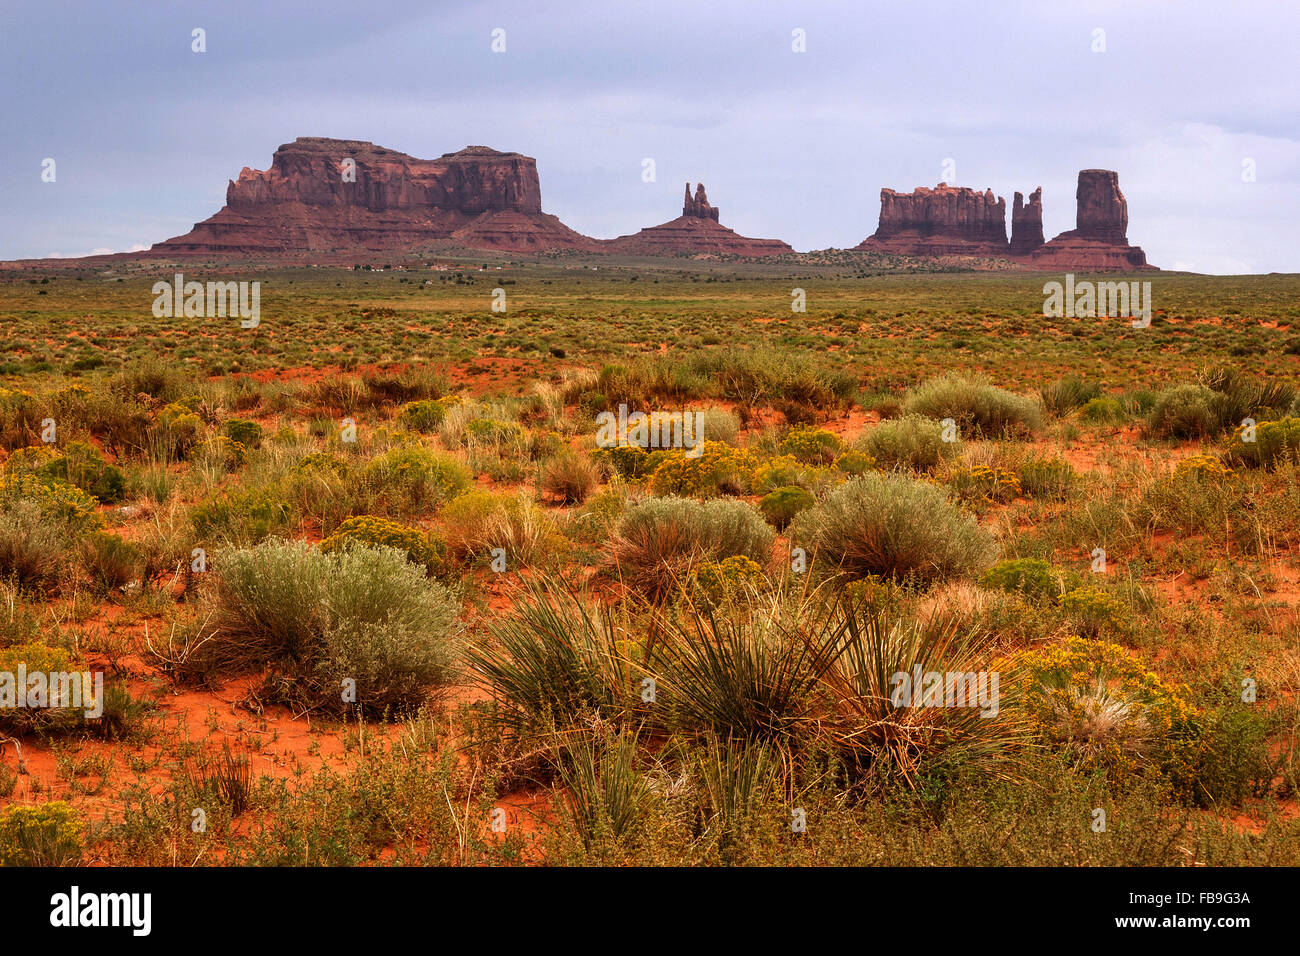 Rock formations, Brigham's Tomb, King on the Throne and Stagecoach, Monument Valley Navajo Tribal Park, Utah, USA Stock Photo